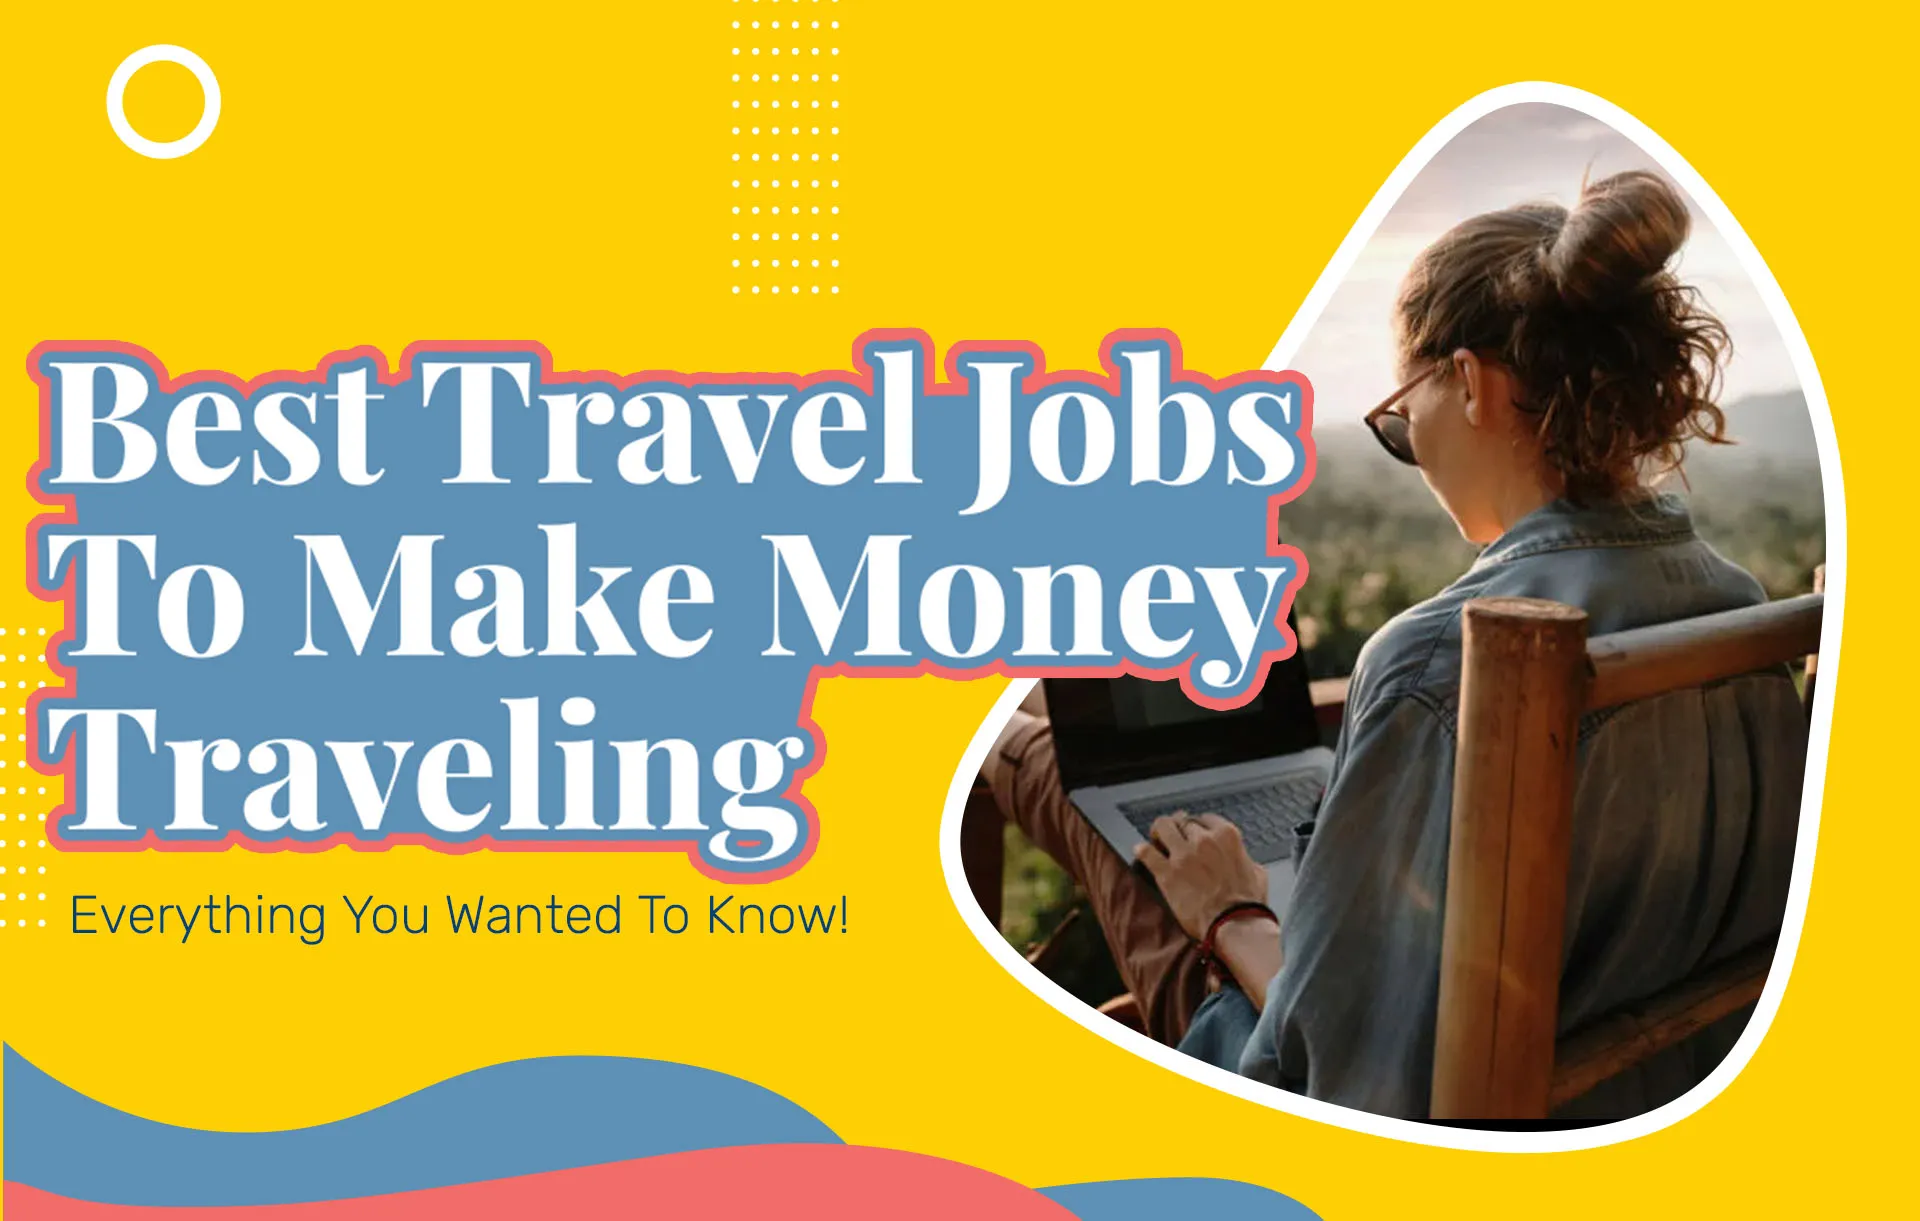 Best Travel Jobs To Make Money Traveling: Everything You Wanted To Know!